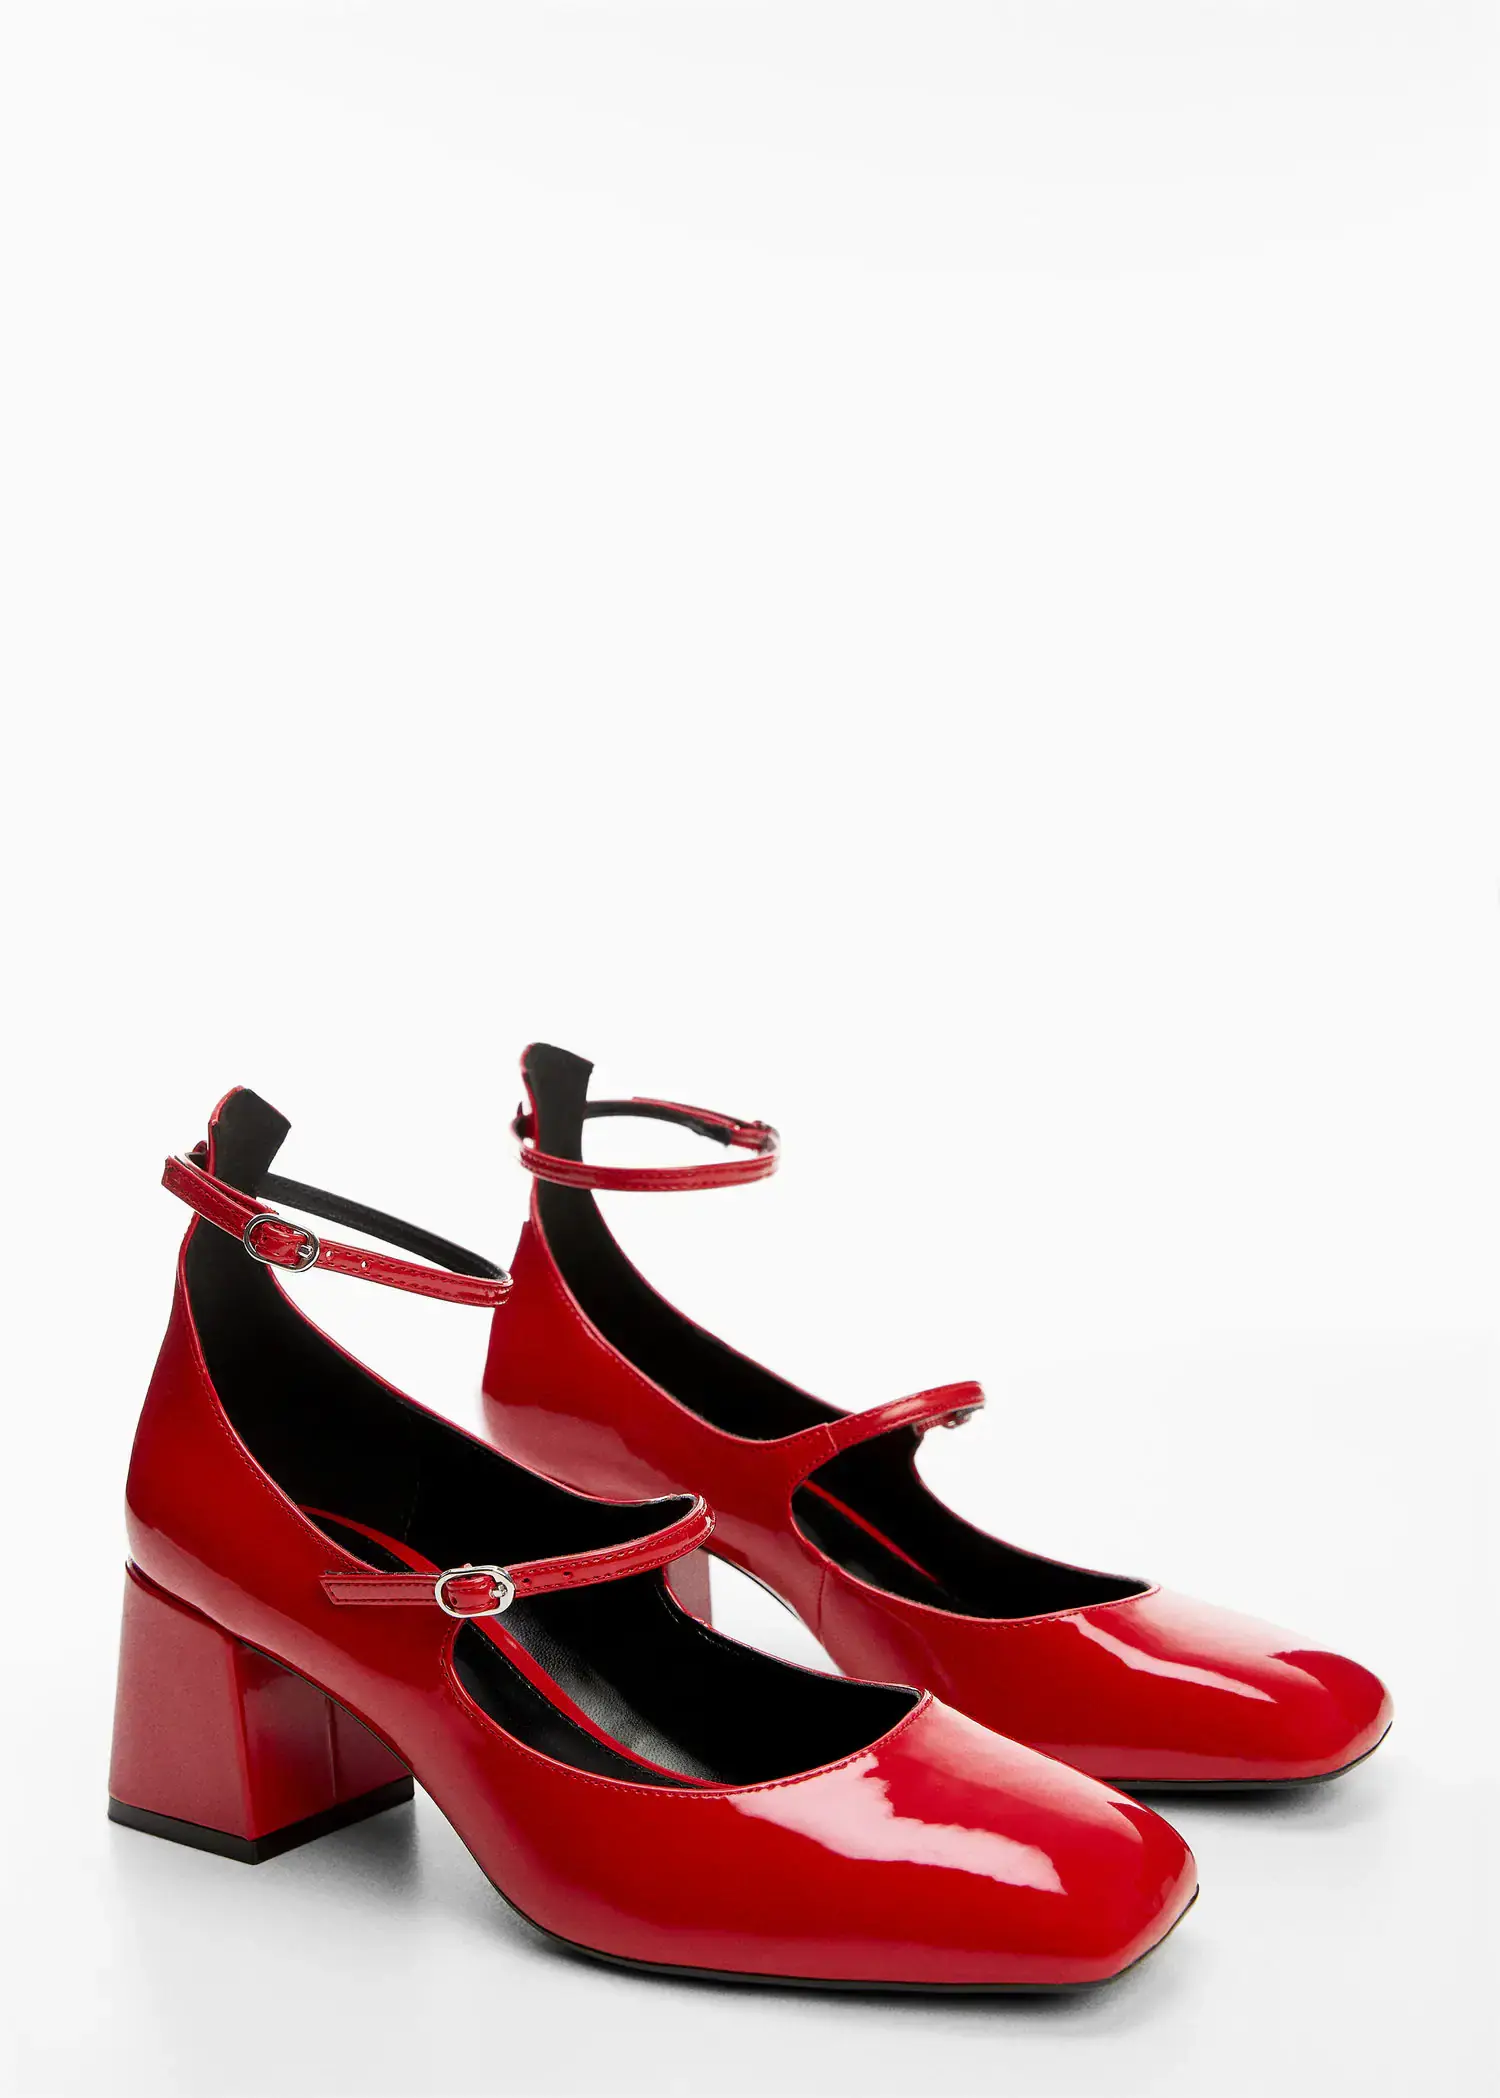 Mango Patent leather-effect shoes with buckle. 3